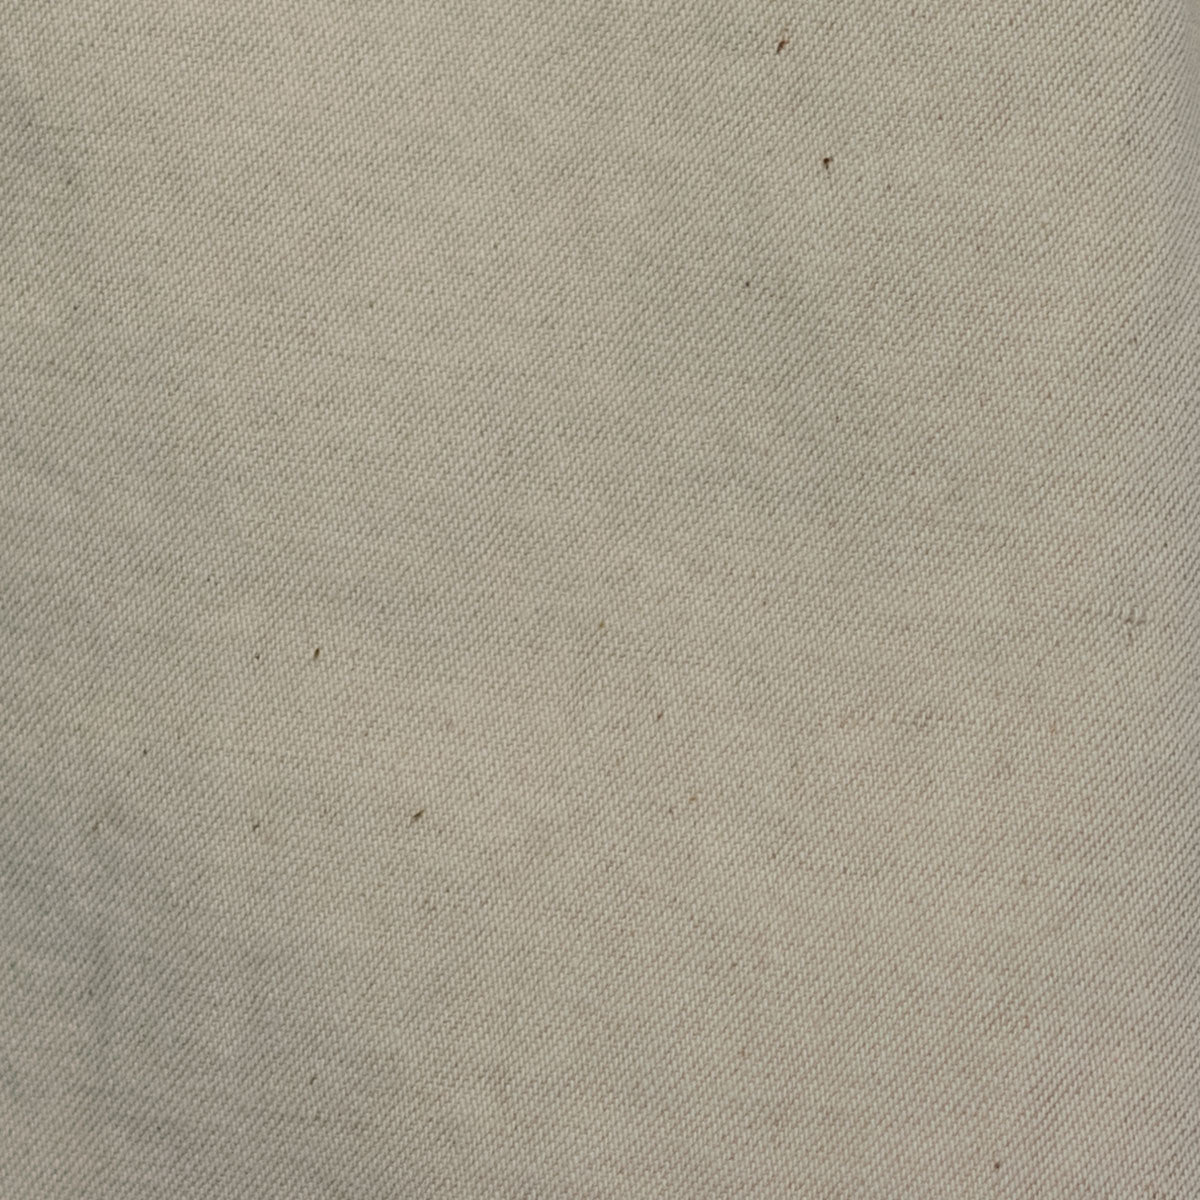 141425L_KSO COTTON LINEN TWILL/NATURAL WASHER FINISH